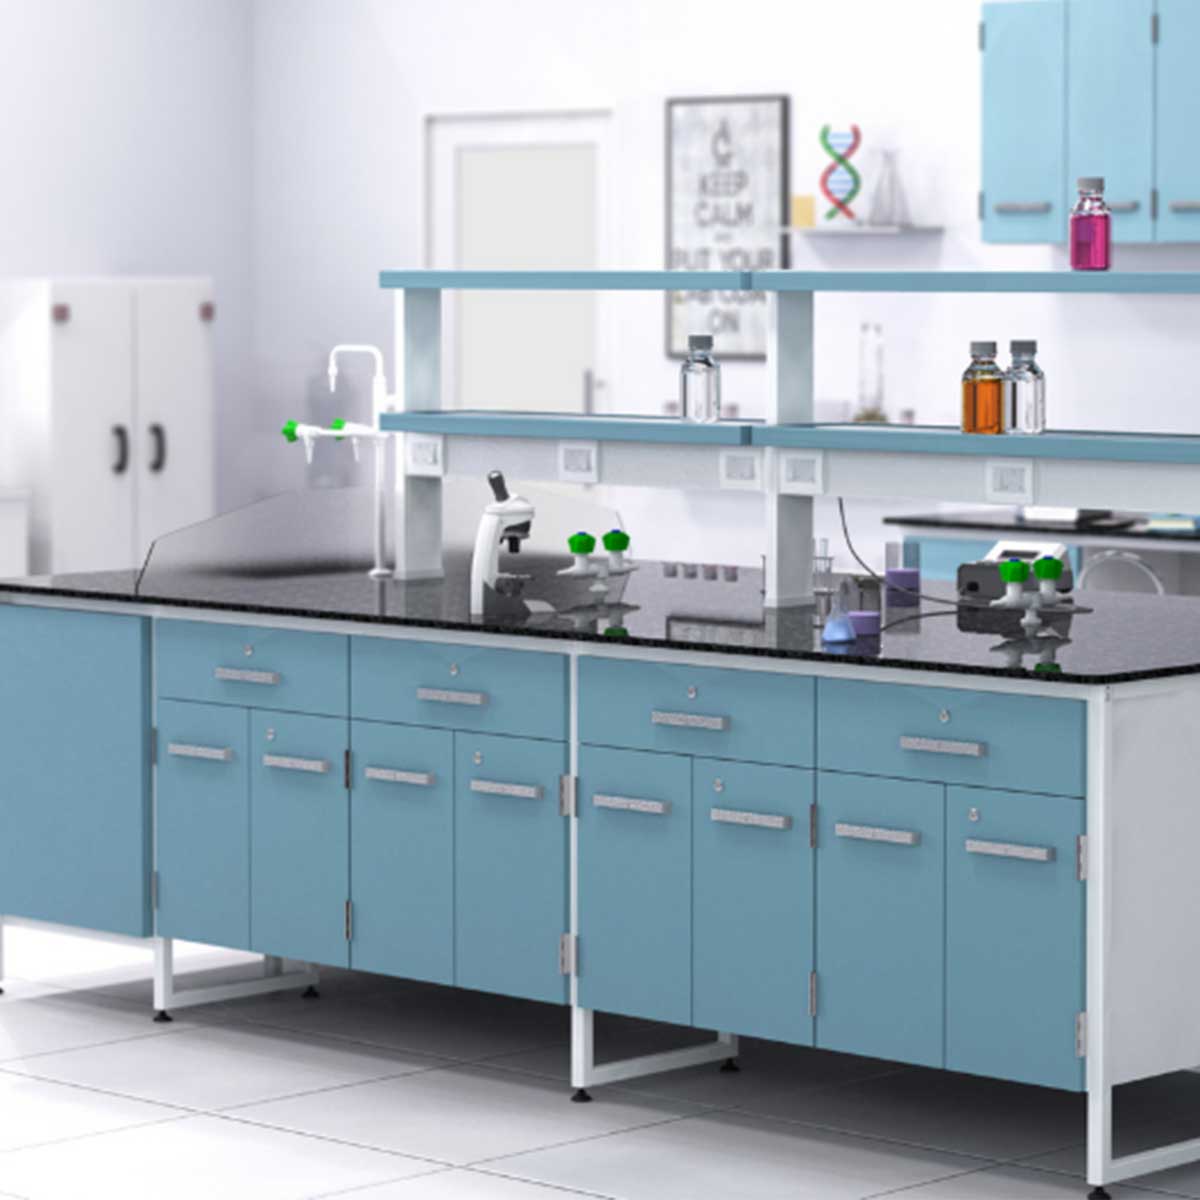 Laboratory Workstation Manufacturers, Suppliers in Lucknow Road